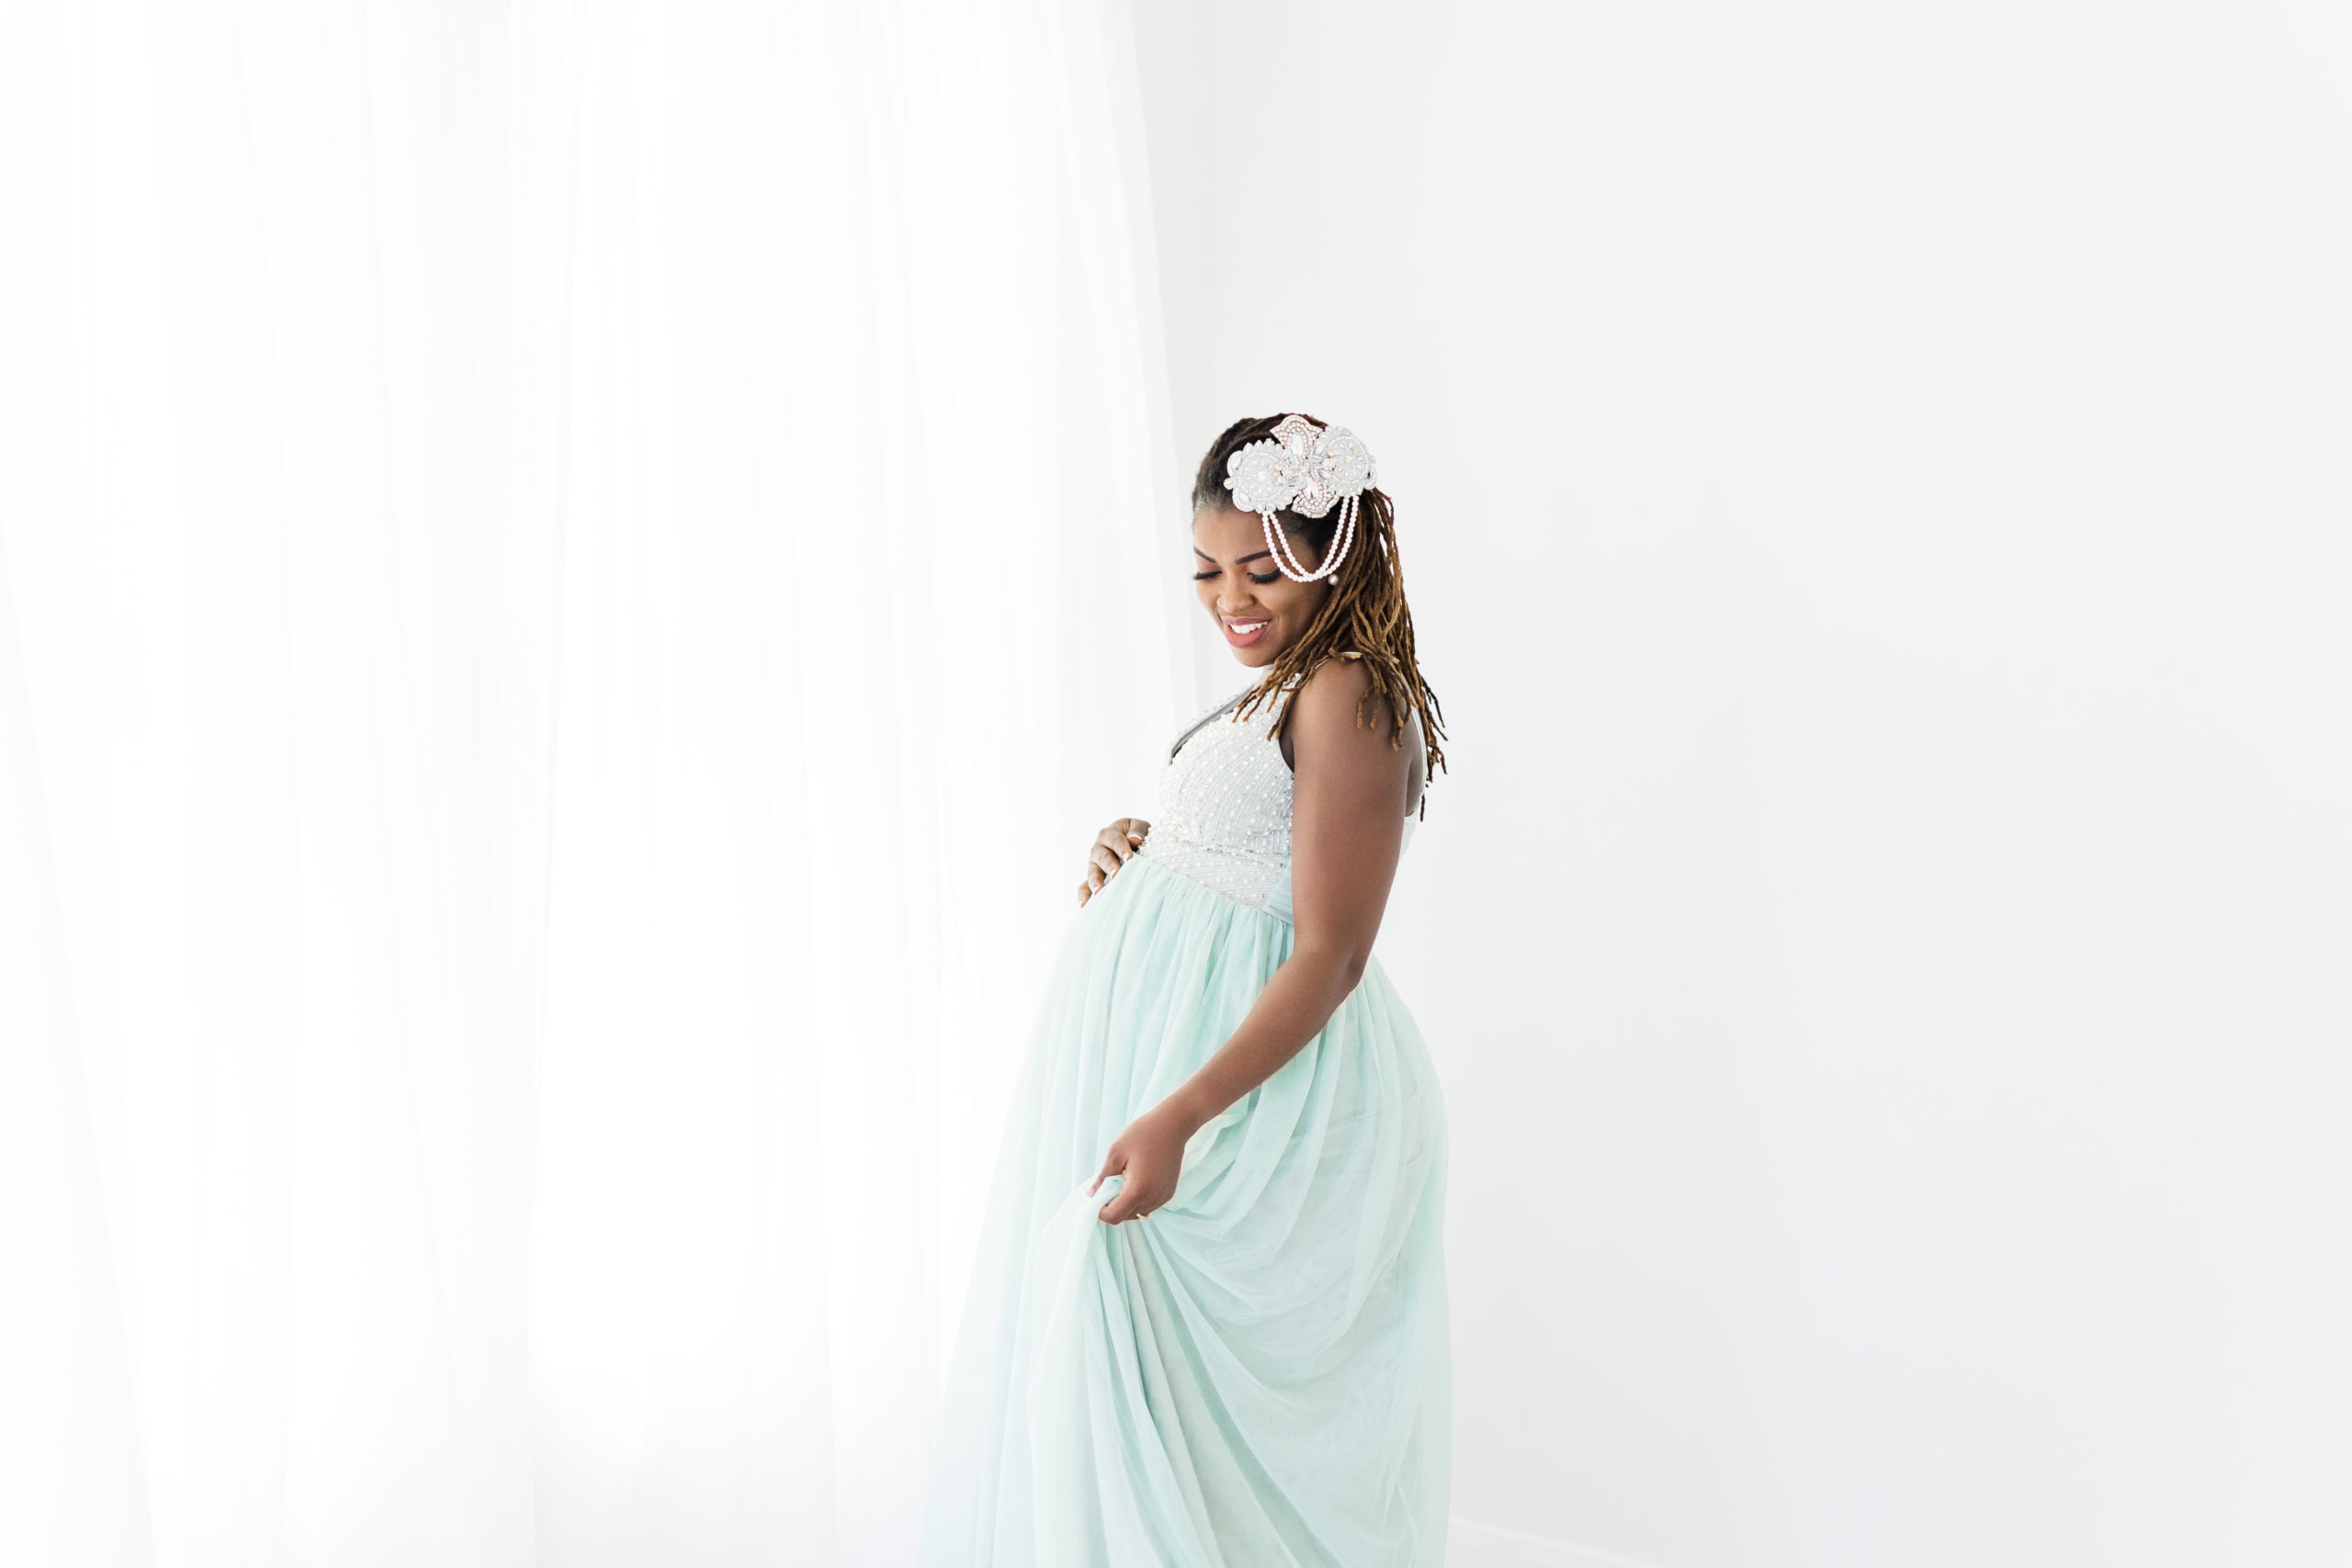 Monette Anne Photography captures a stunning black mother with light blue gown and pearl hair clip smiling while looking down in the Houston area. soon to be mother texas houston maternity photographer #monetteannephotography #monetteannematernity #houstonmaternityphotographer #houstonphotographers #brightlightstudiophotography #houstonmaternityphotography #maternitystyle #babybump #bumppictures #parentstobe #maternitydress #whitestudio #texashoustonphotographers #babyontheway